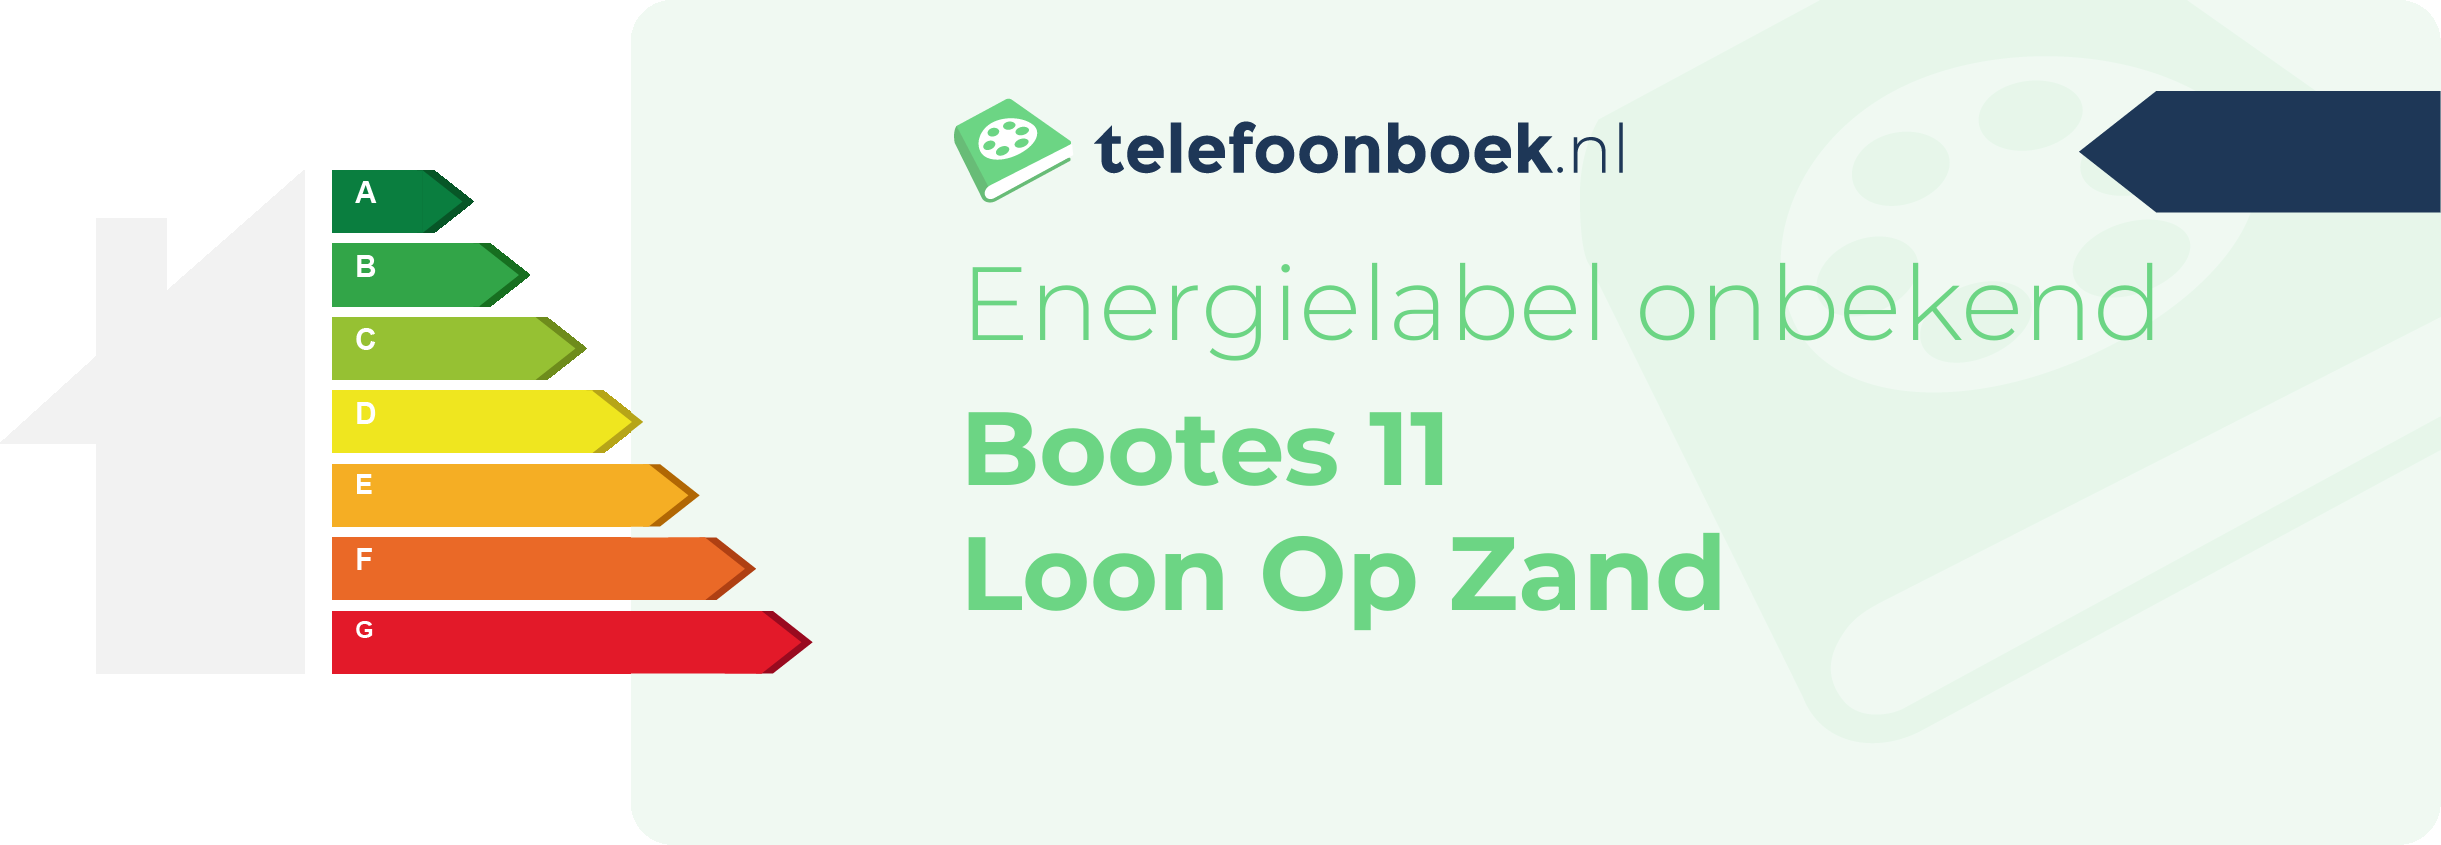 Energielabel Bootes 11 Loon Op Zand